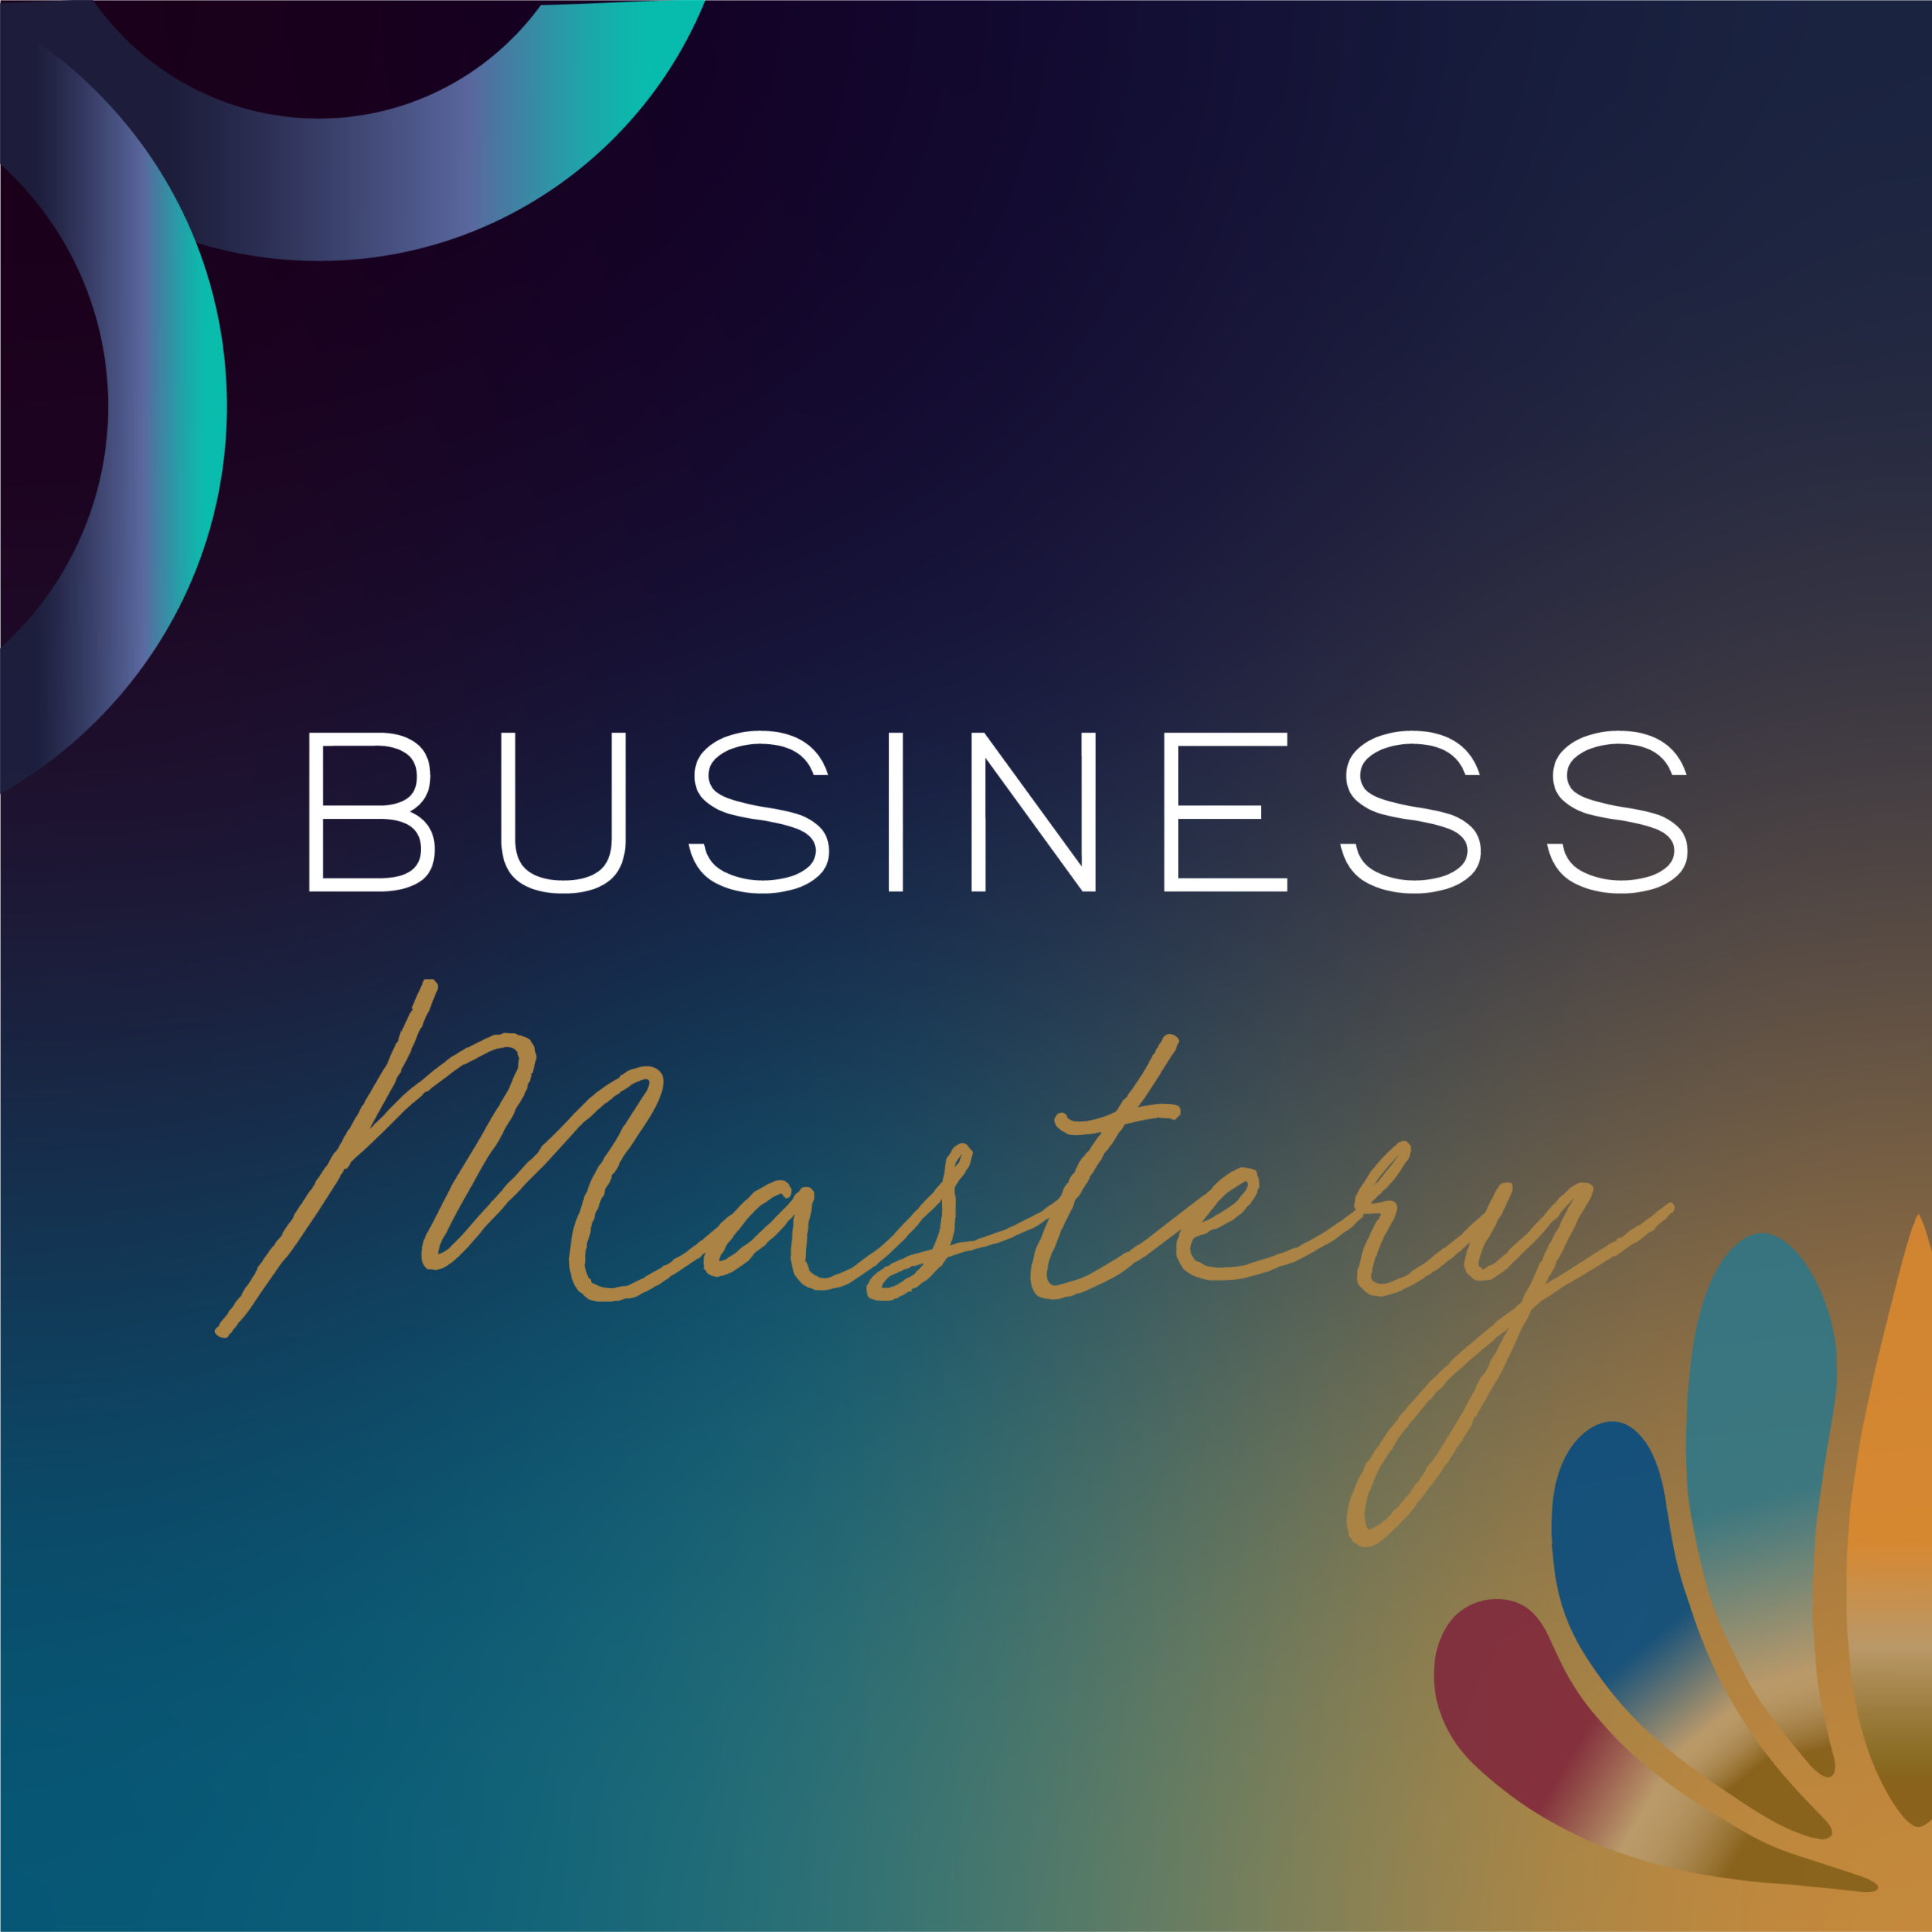 Business Mastery, Consultancy and Coaching Programme for Businesses. Consultancy and Coaching